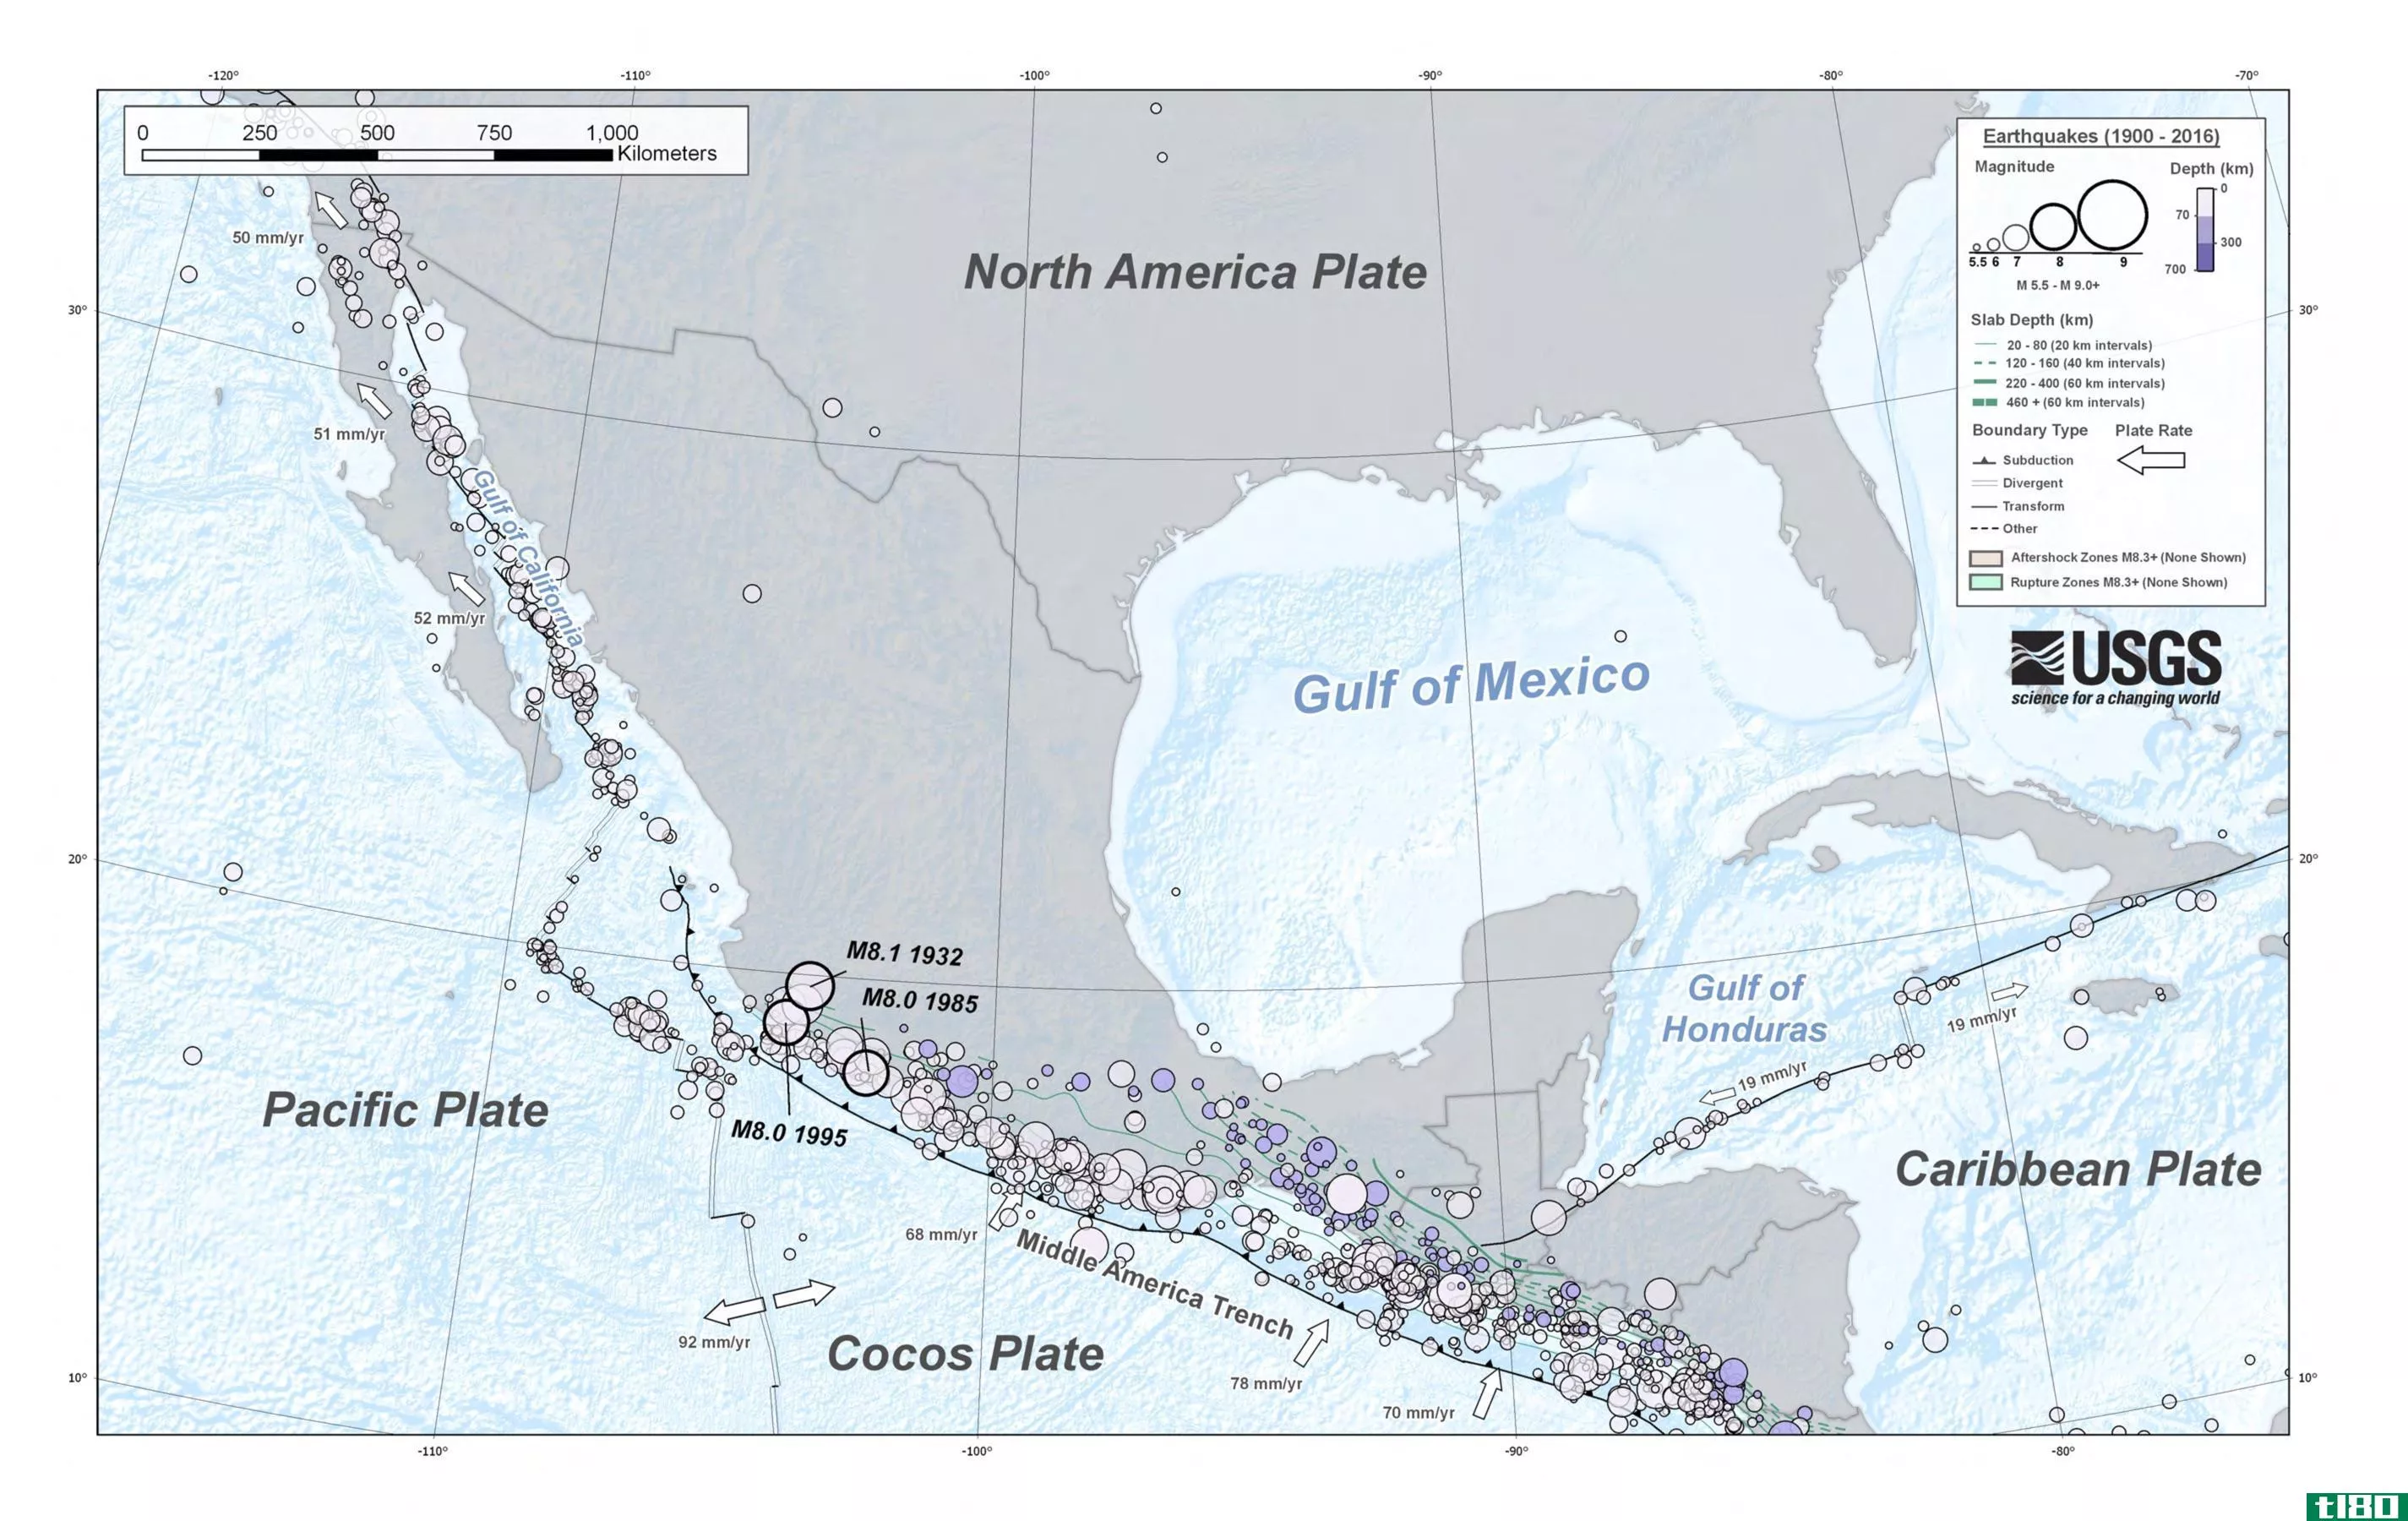 Mexico sits at the boundary of three tectonic plates: the Cocos plate, the North American plate, and the Pacific plate.